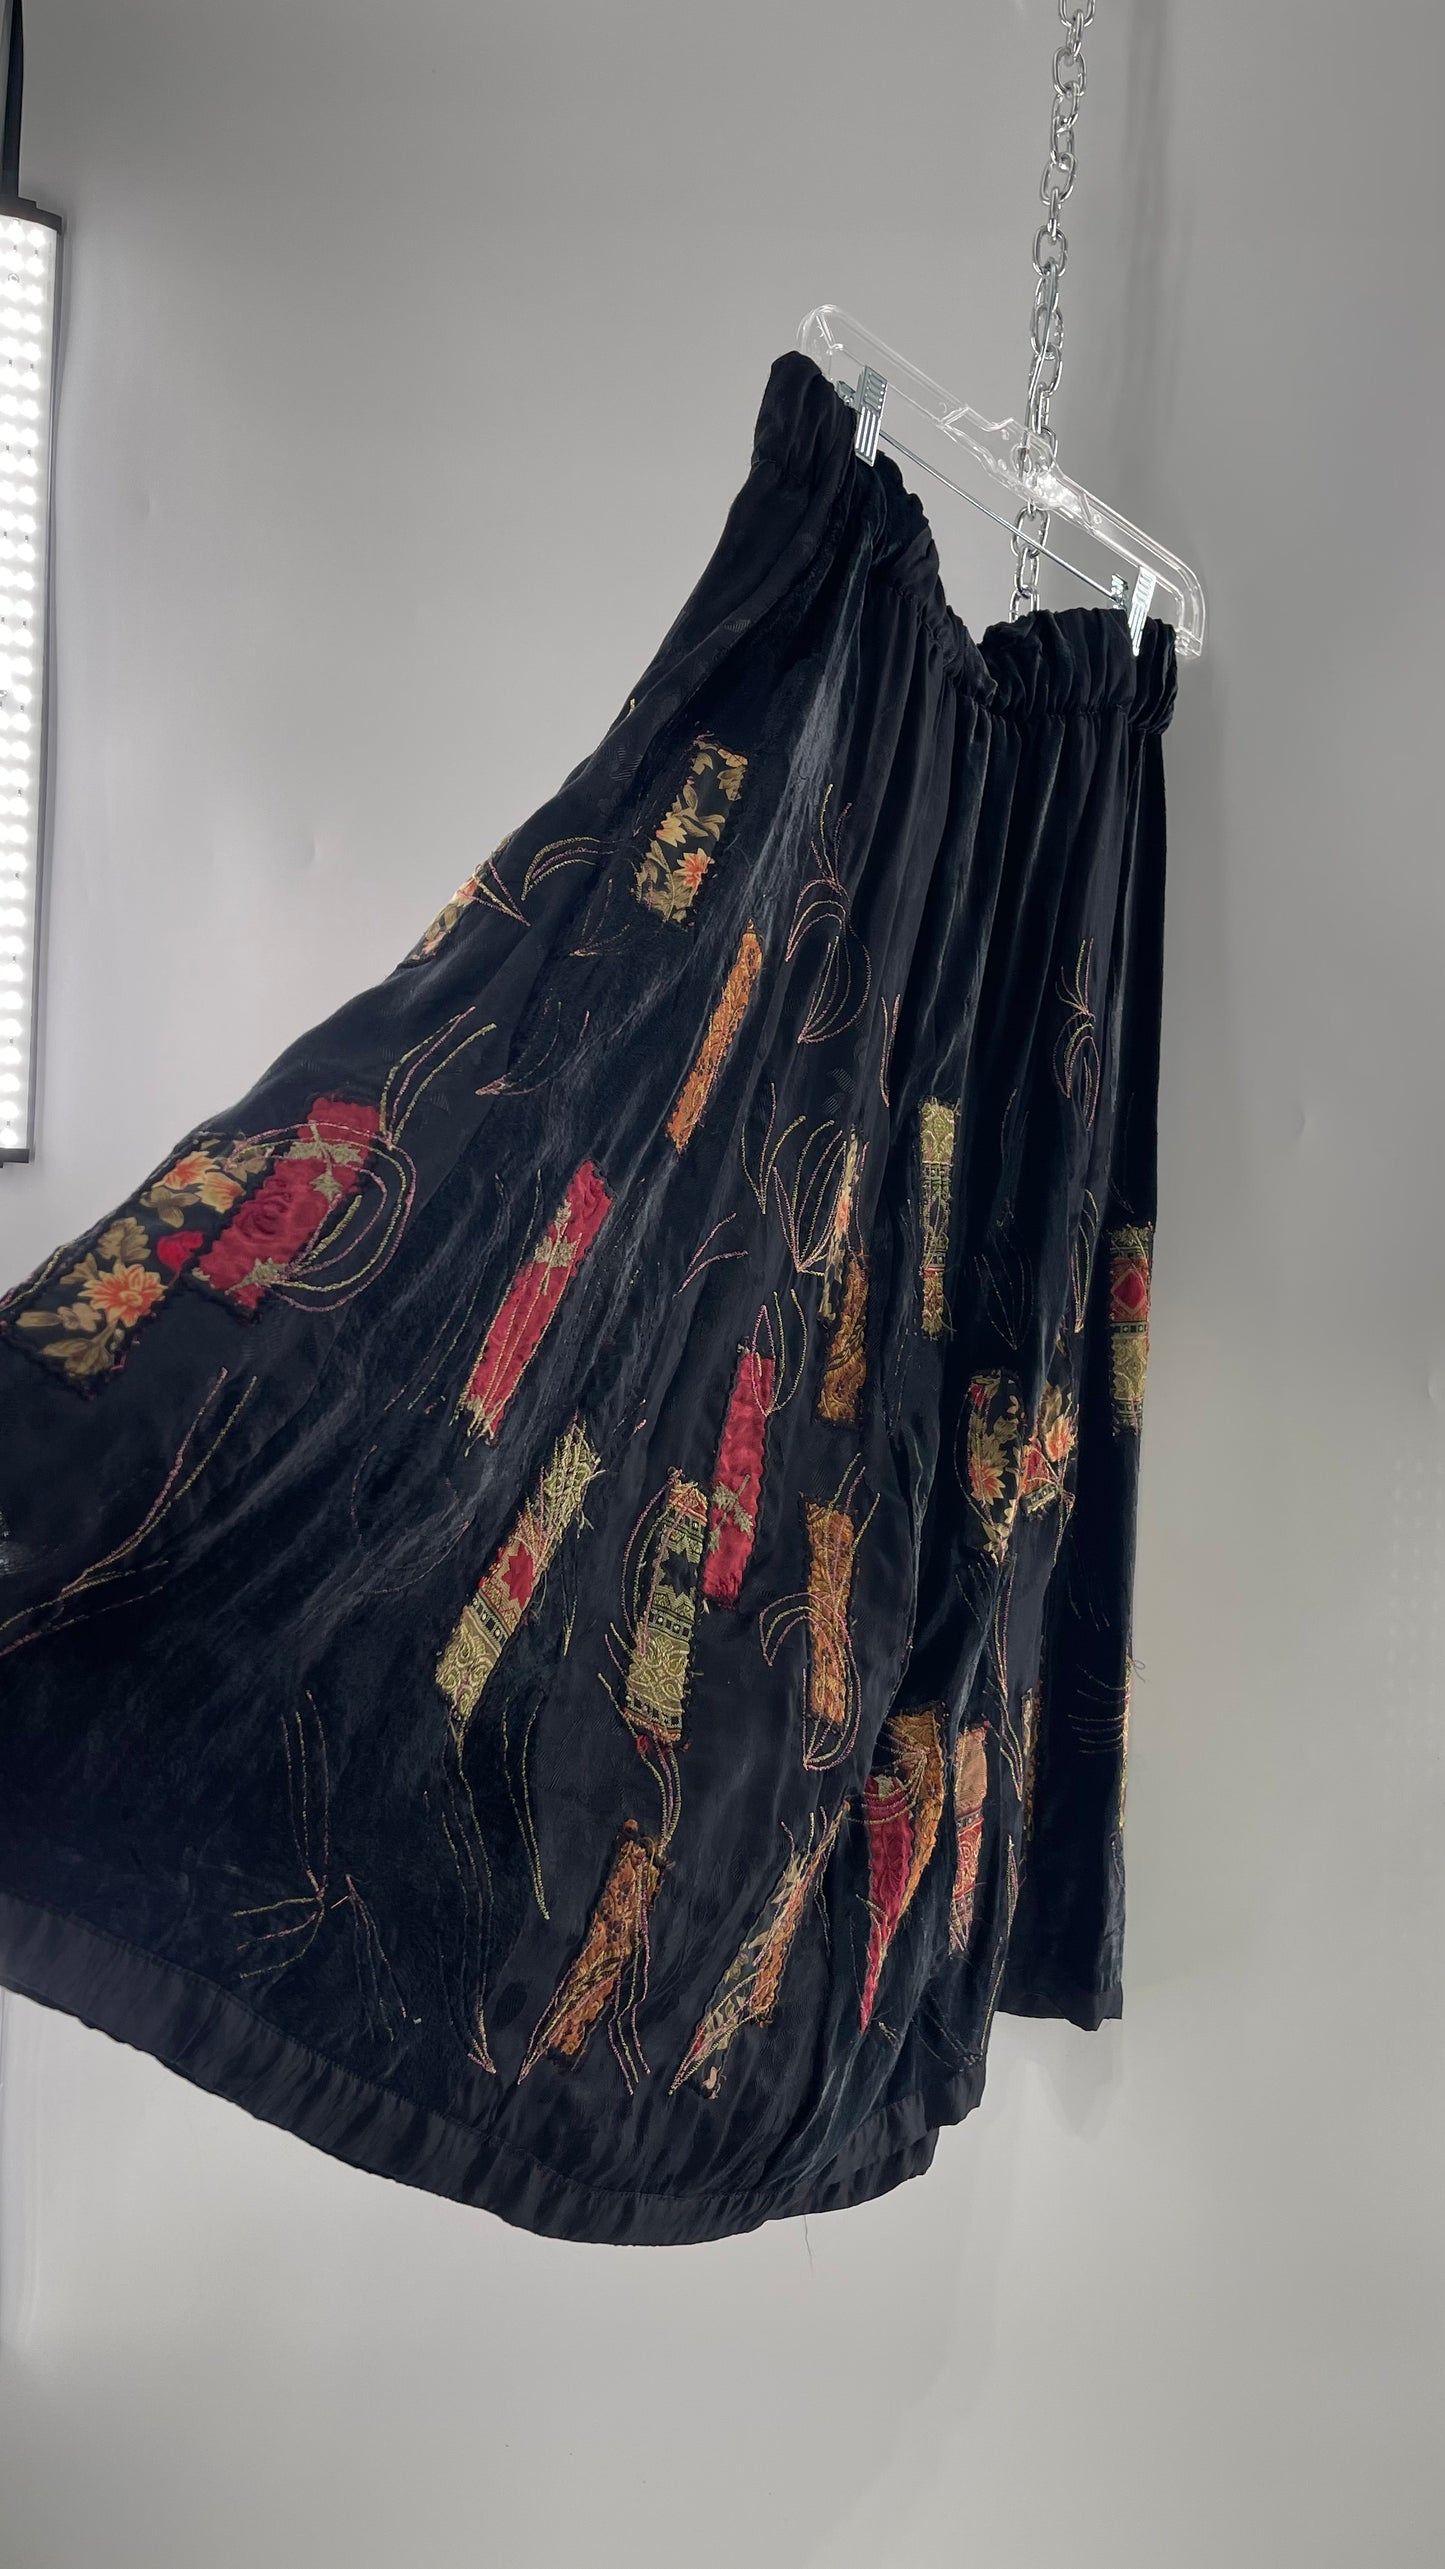 Vintage Black Velvet and Embossed Florals Patchwork Skirt with Metallic Stitch Detailing with Lining and Thick Waistline (M)